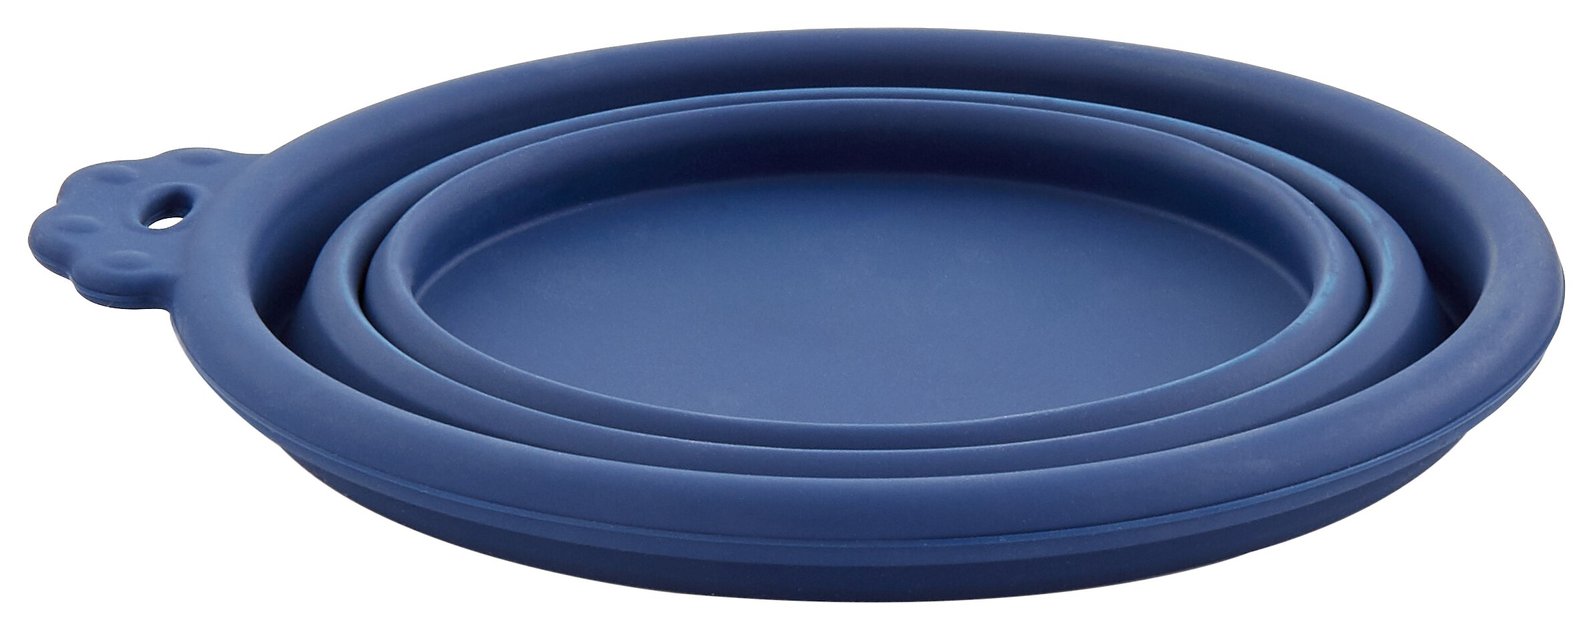 Totally Pooched Non-Slip Silicone Collapsible Bowl